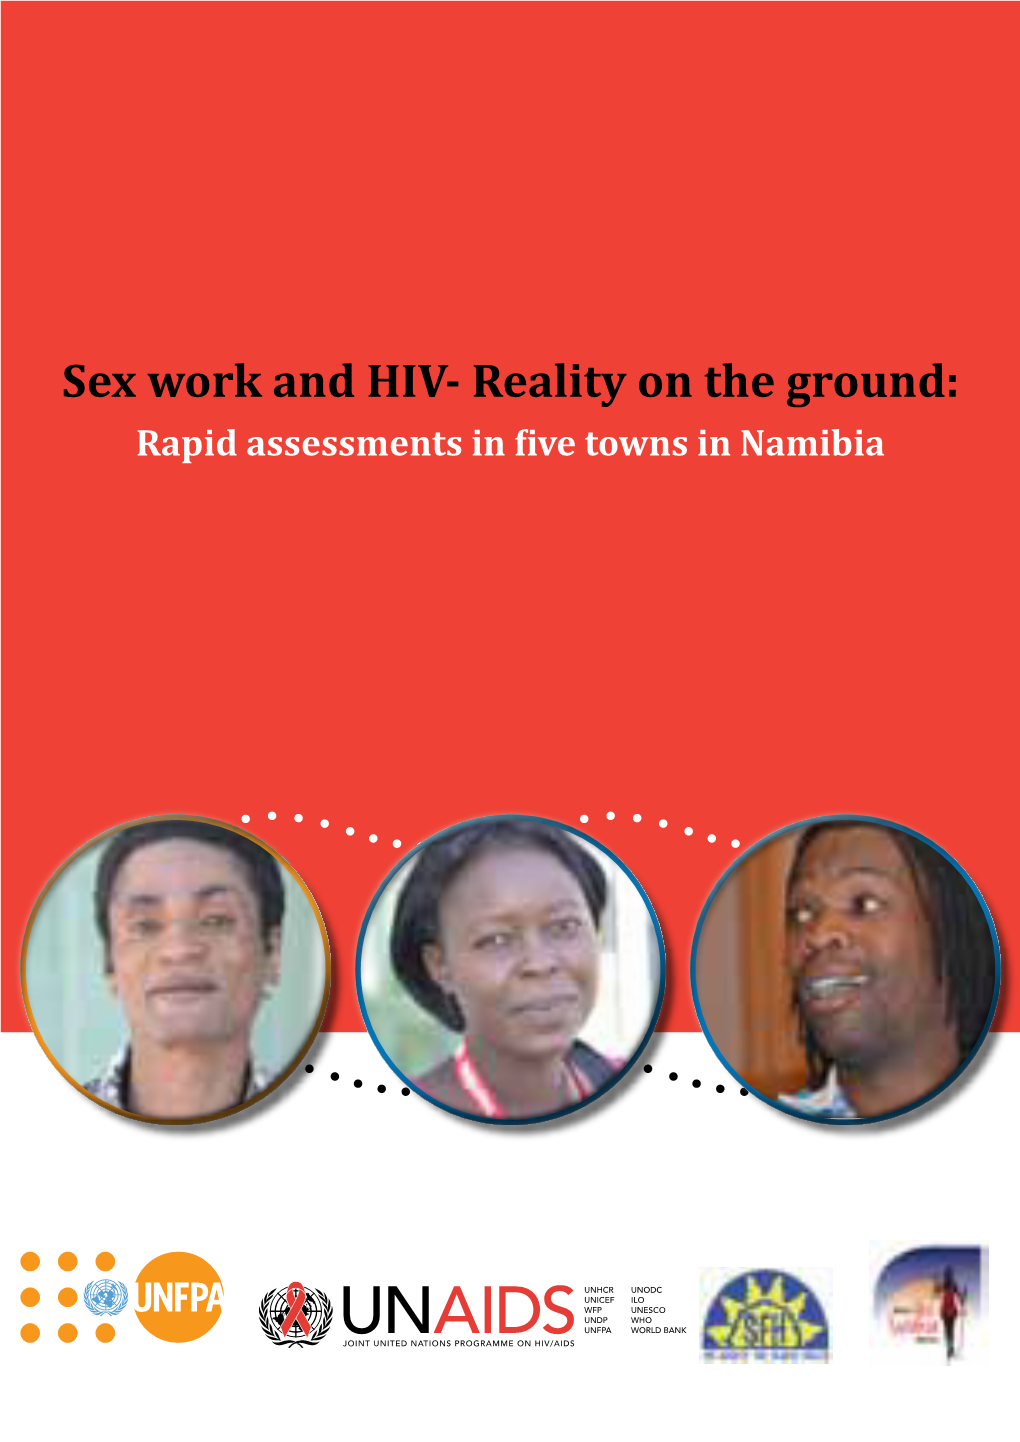 Sex Work and HIV- Reality on the Ground: Rapid Assessments in Five Towns in Namibia